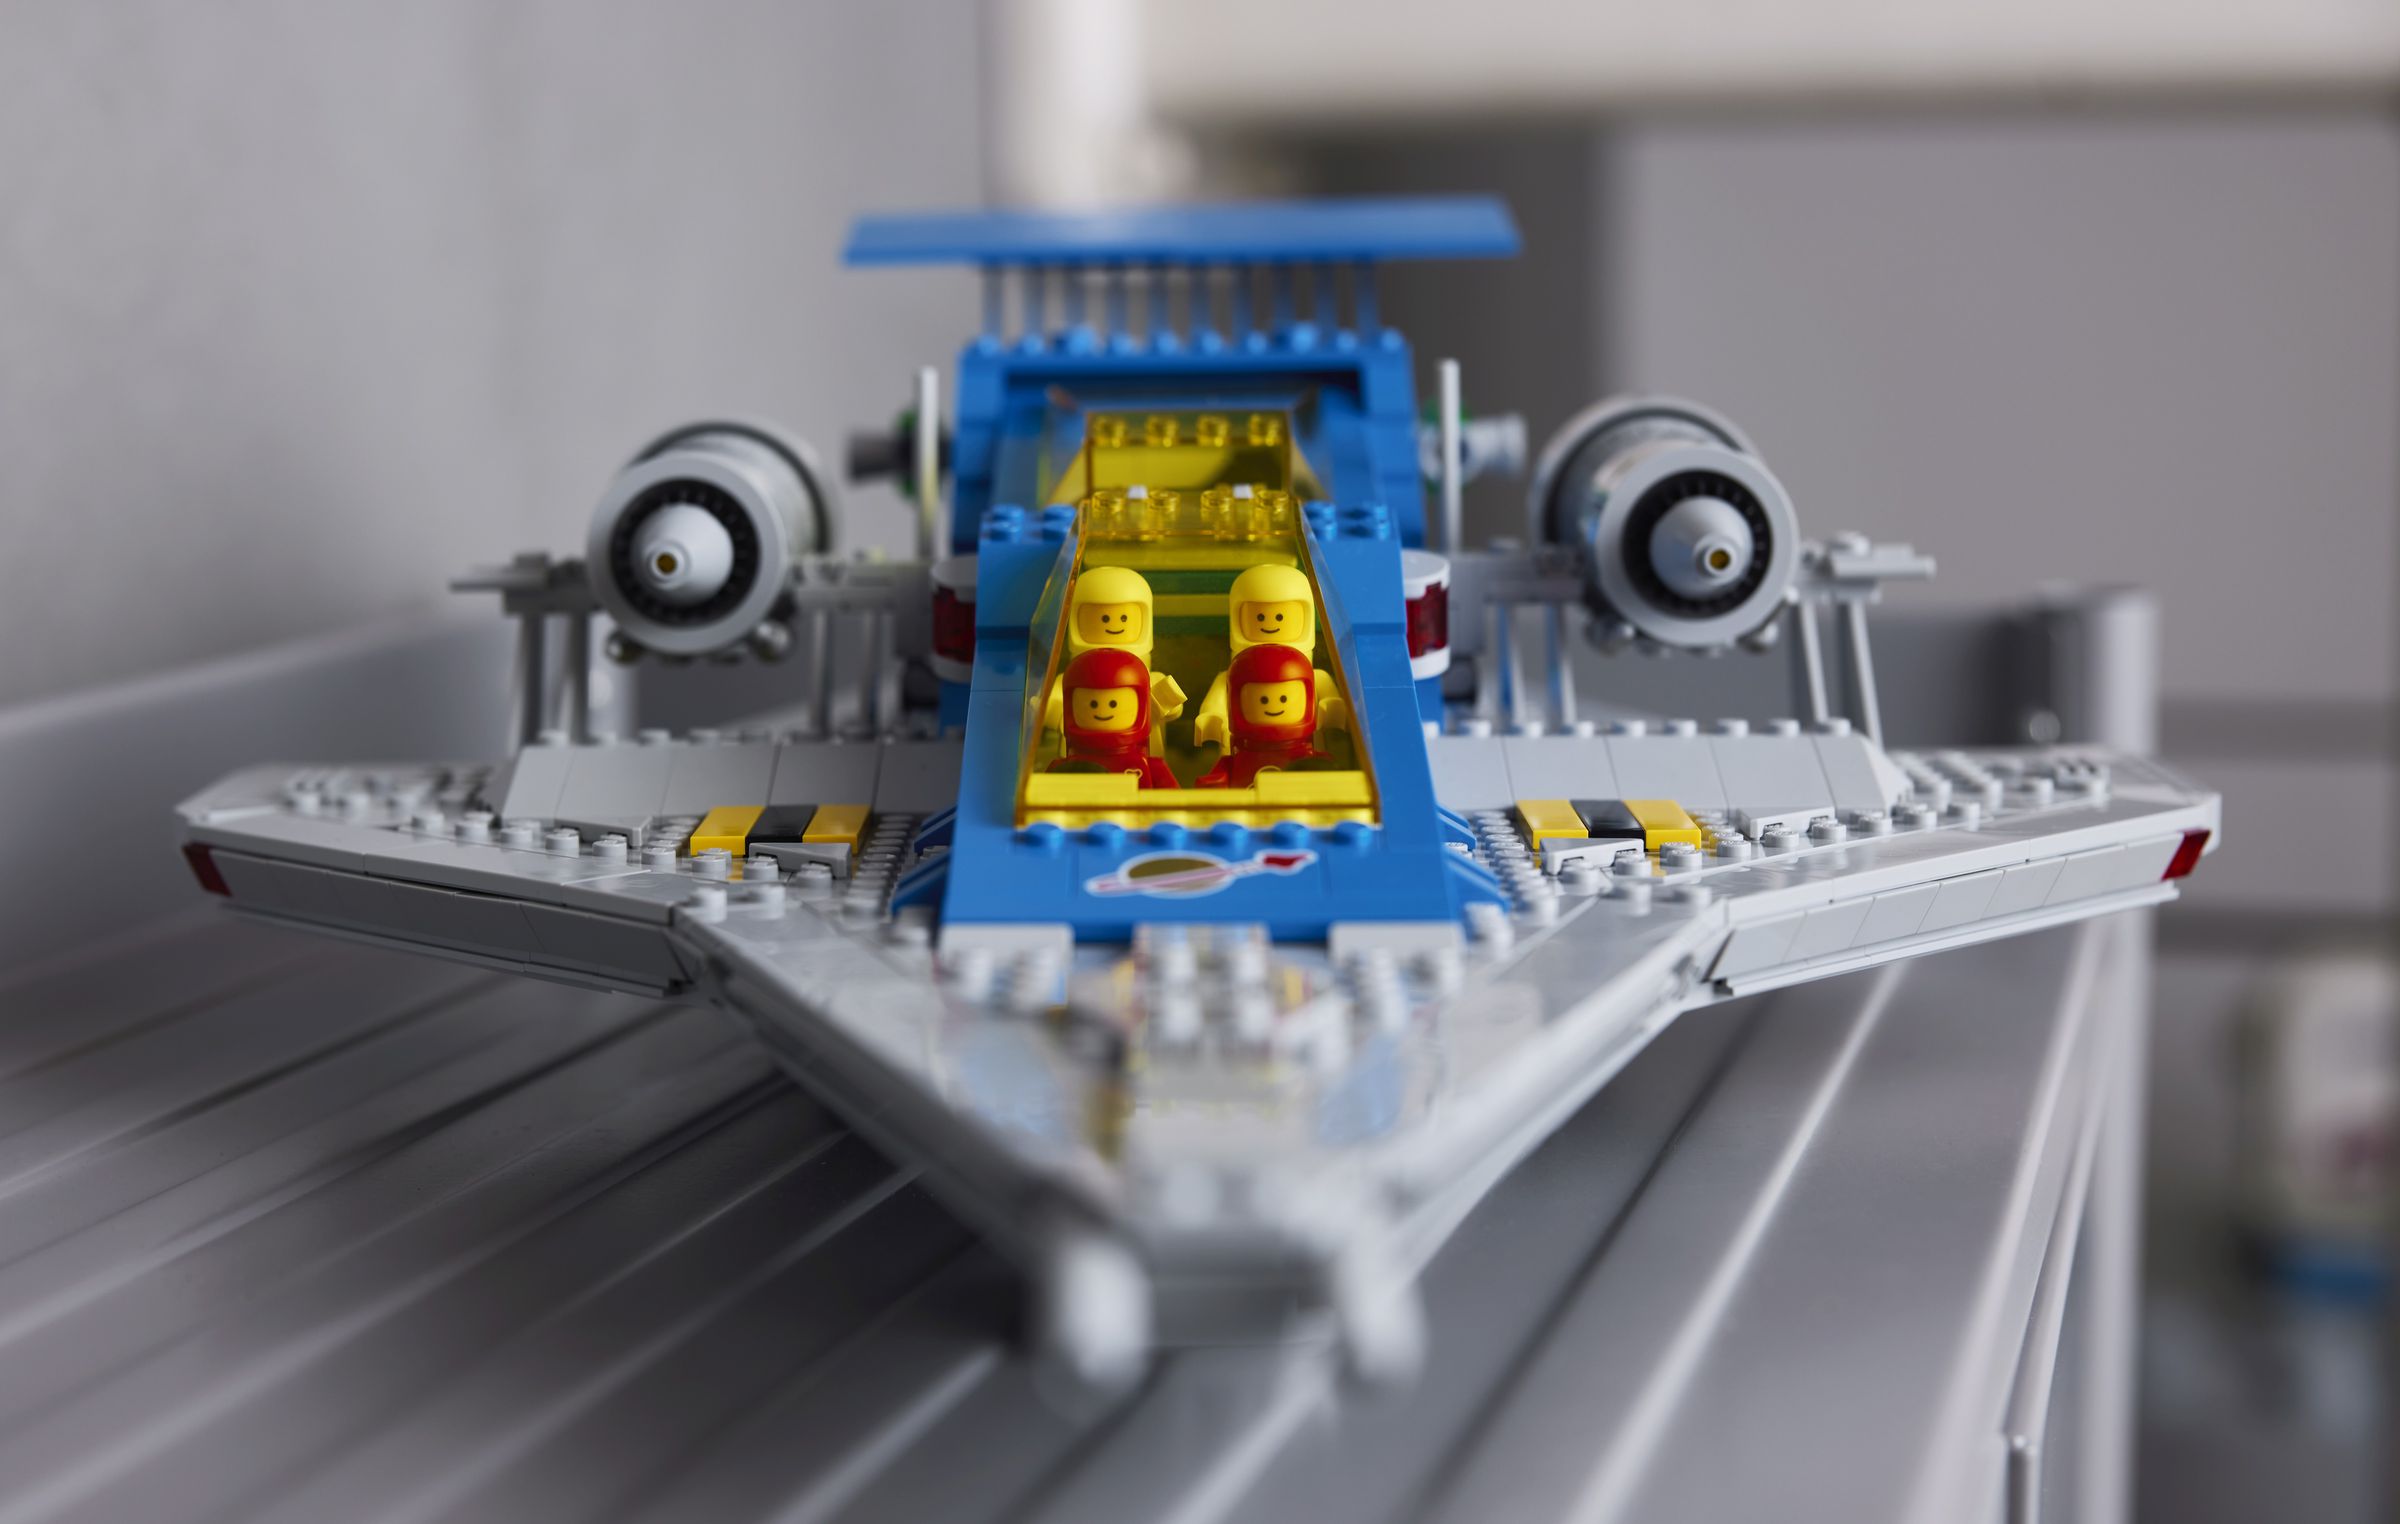 Psiaki says the classic helmet lets Lego fit four minifigs in the cockpit, which didn’t quite work with a modernized one they tested.